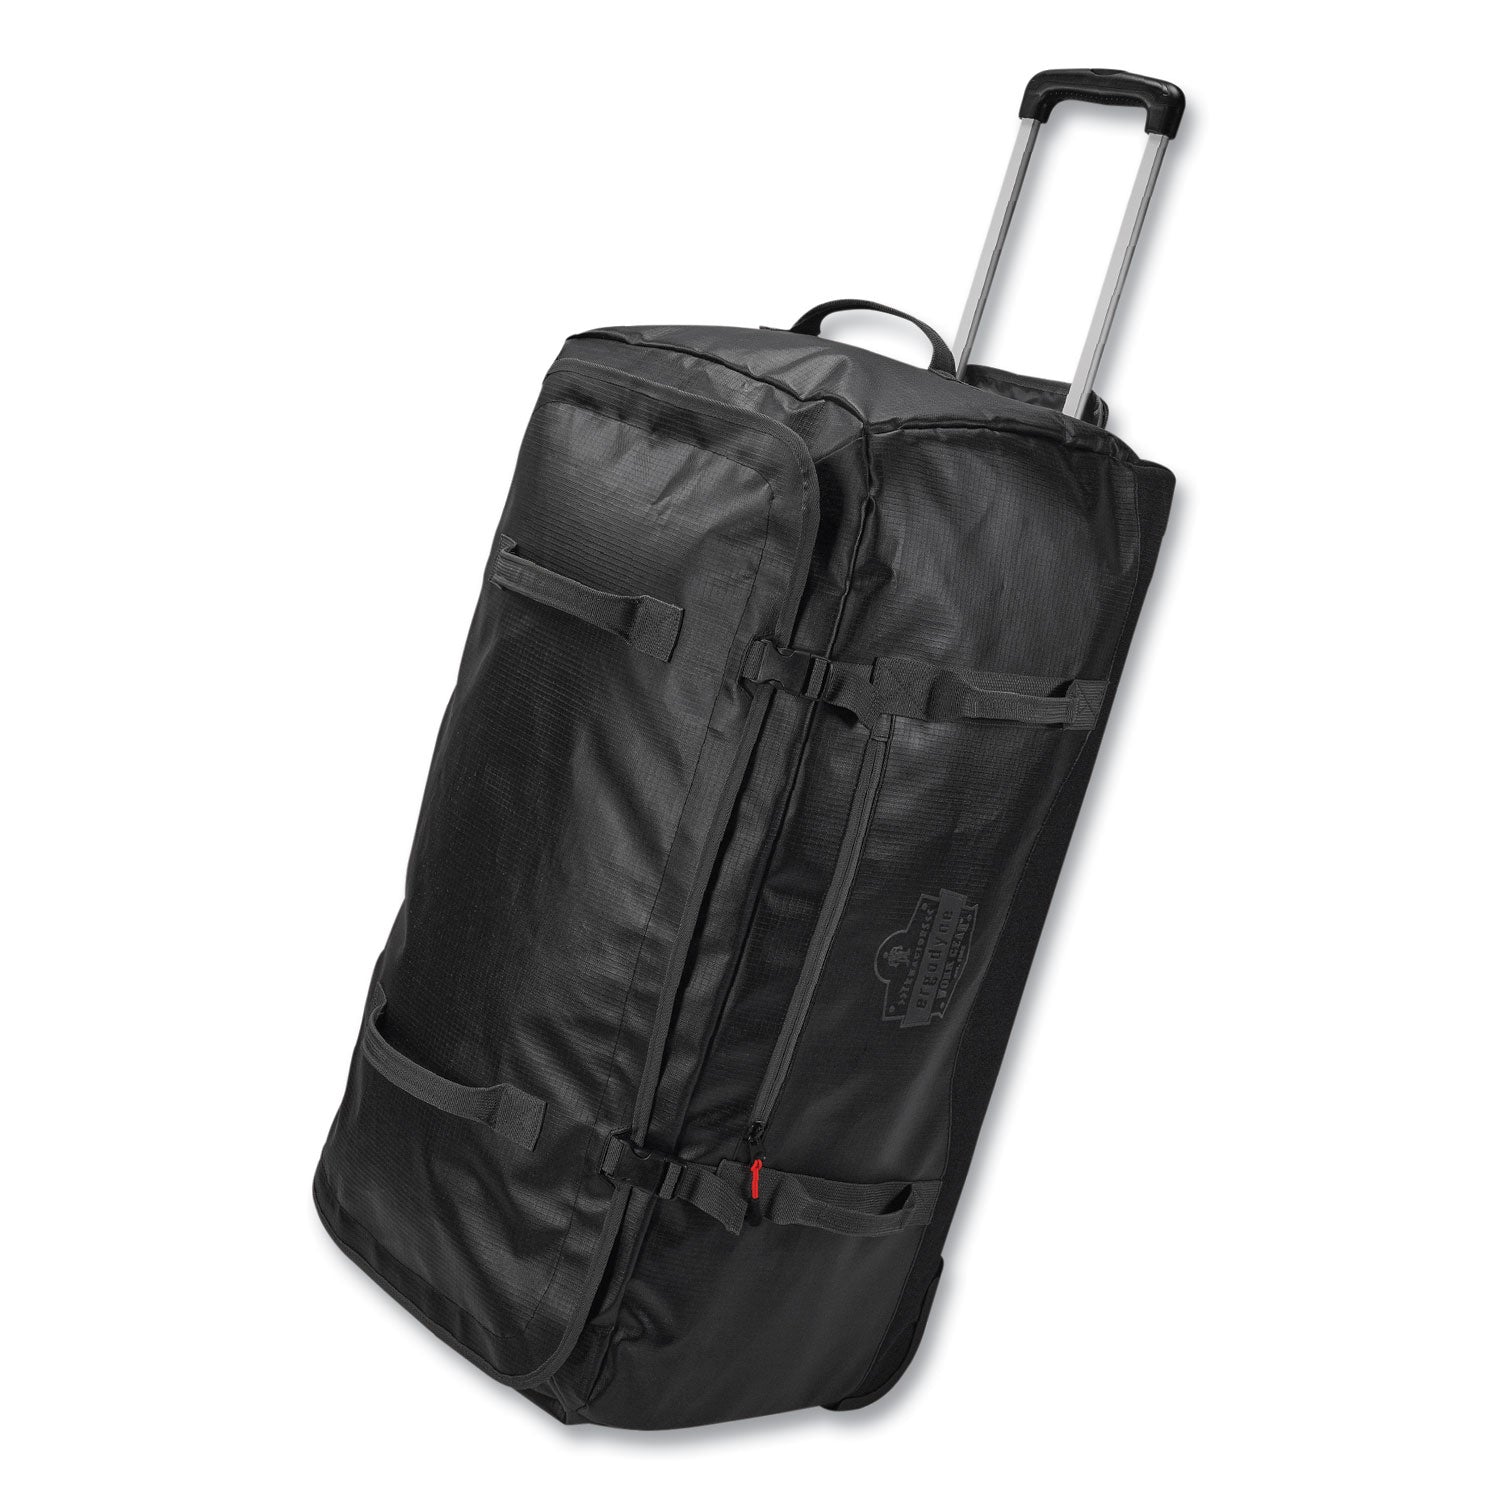 arsenal-5032-water-resistant-wheeled-duffel-bag-15-x-315-x-15-black-ships-in-1-3-business-days_ego13037 - 1